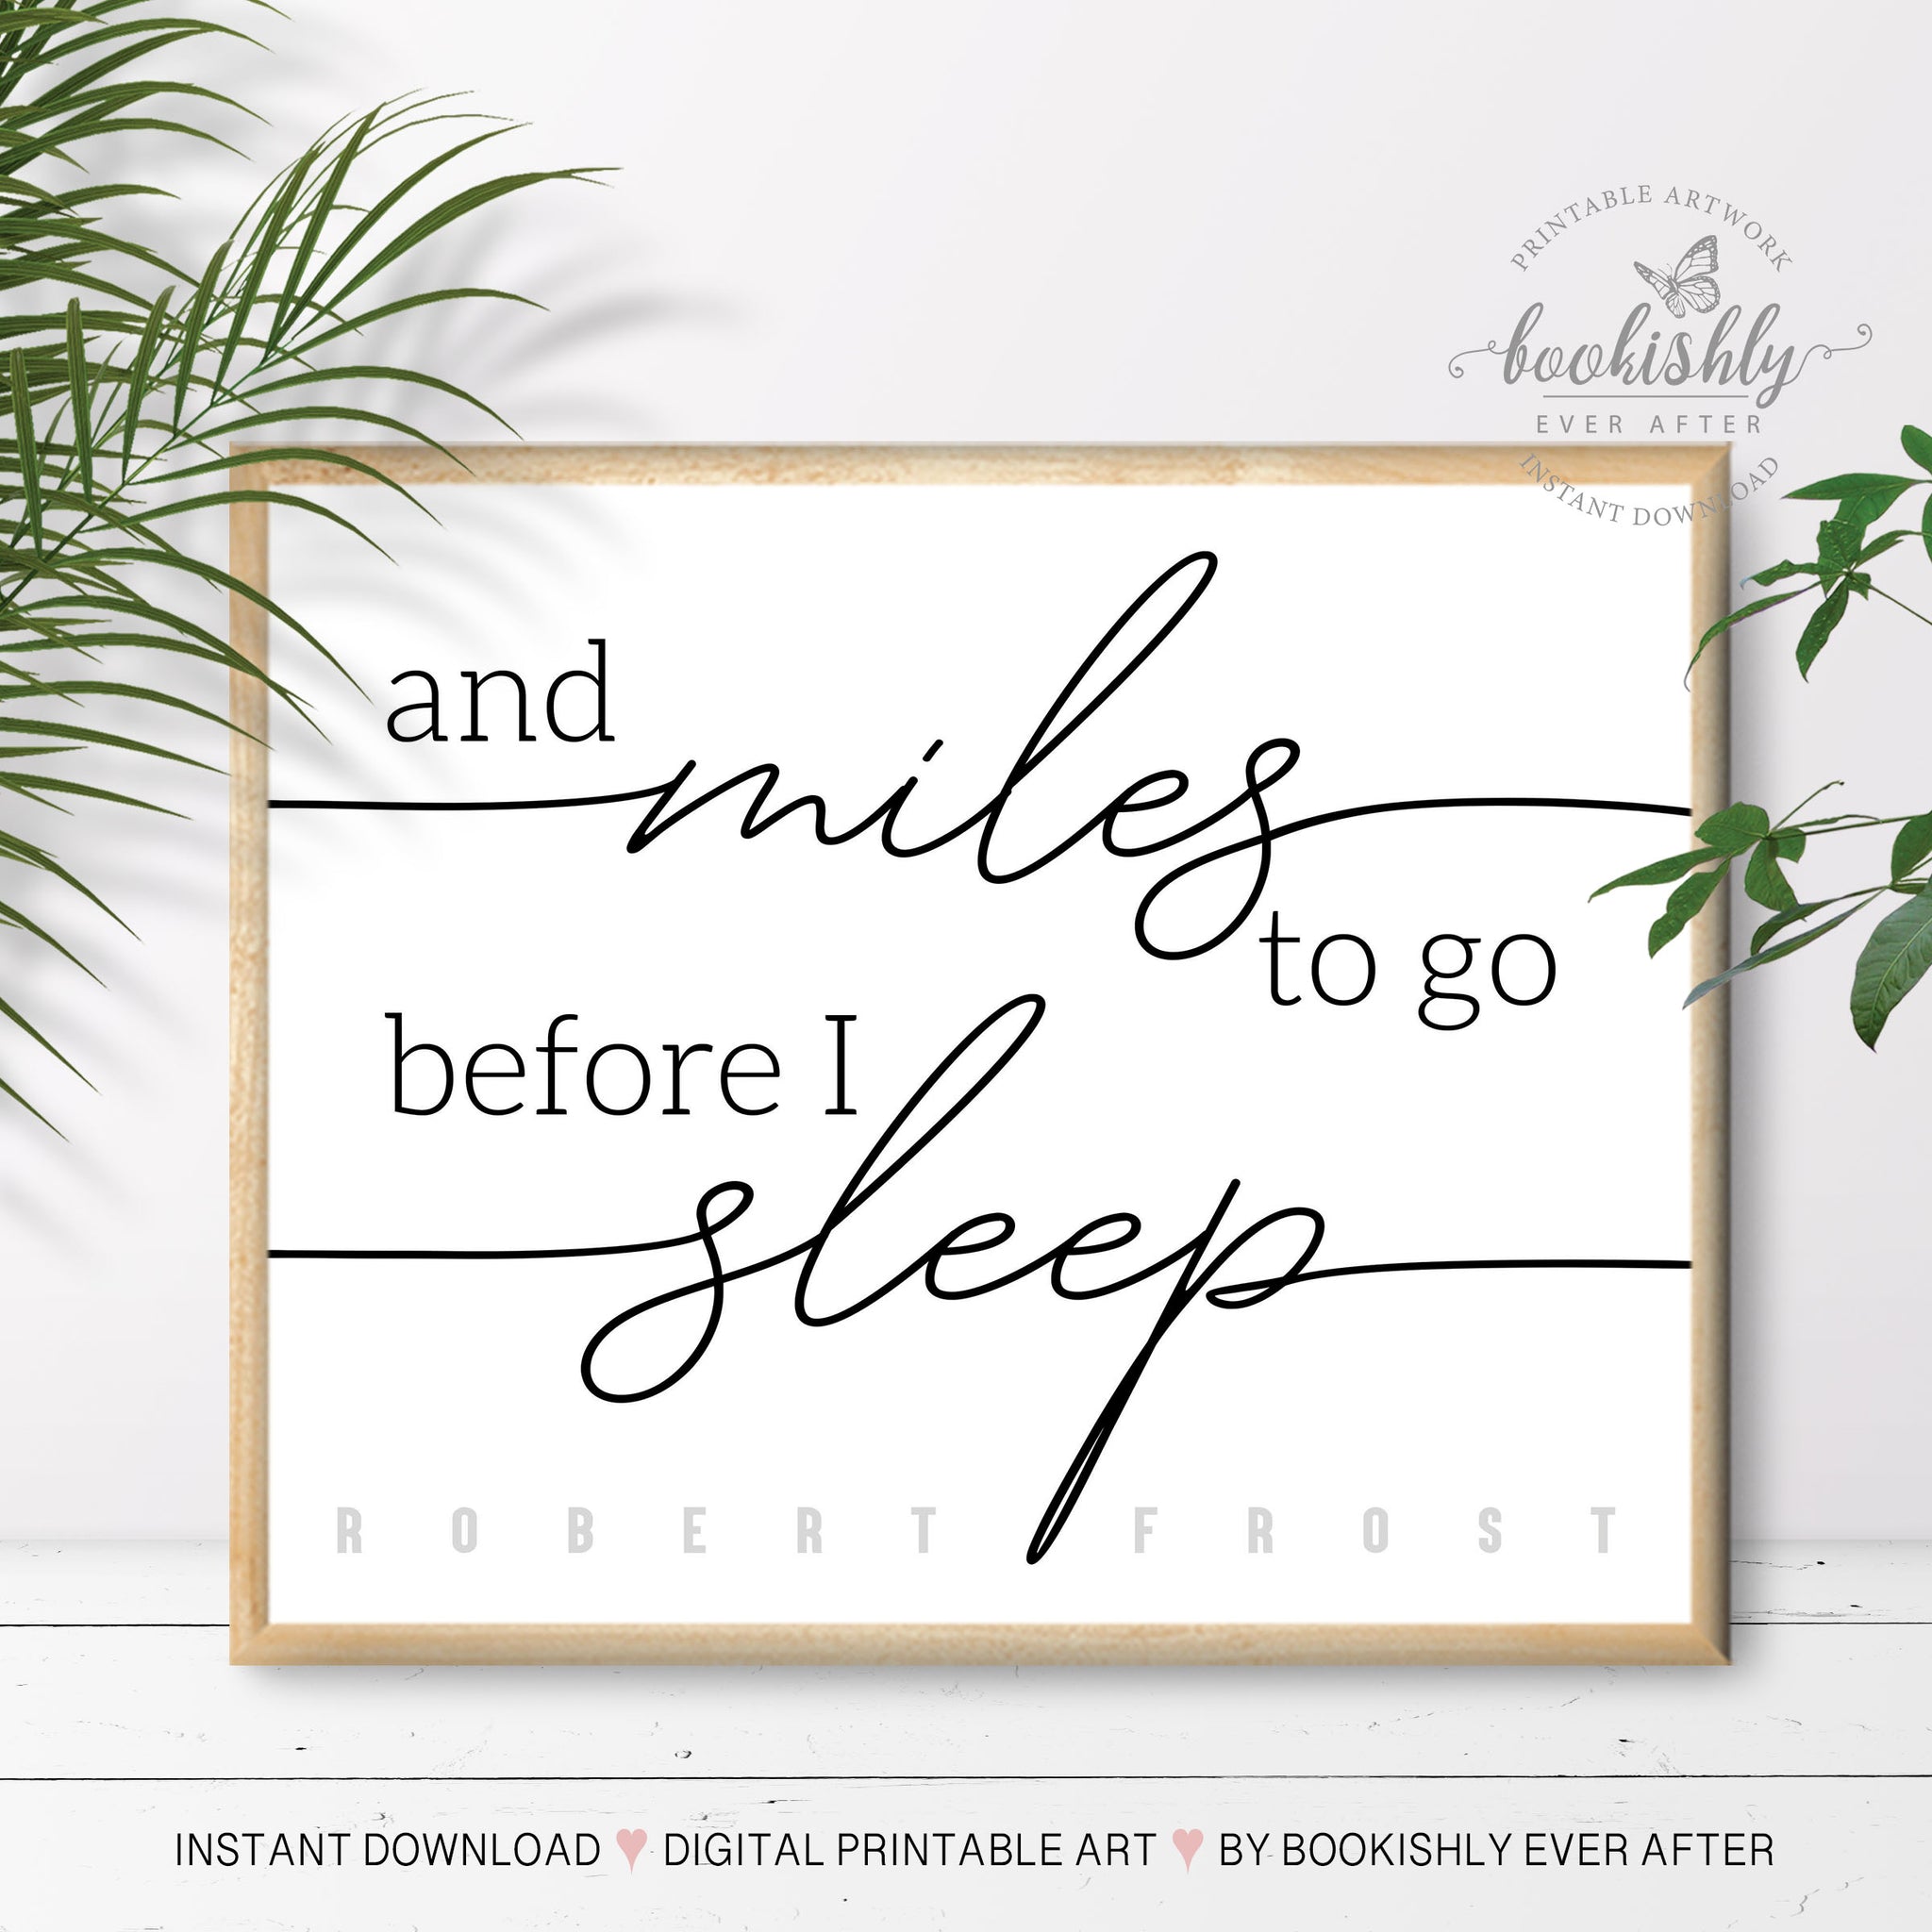 and miles to go before i sleep robert frost quote printable art bookishly ever after